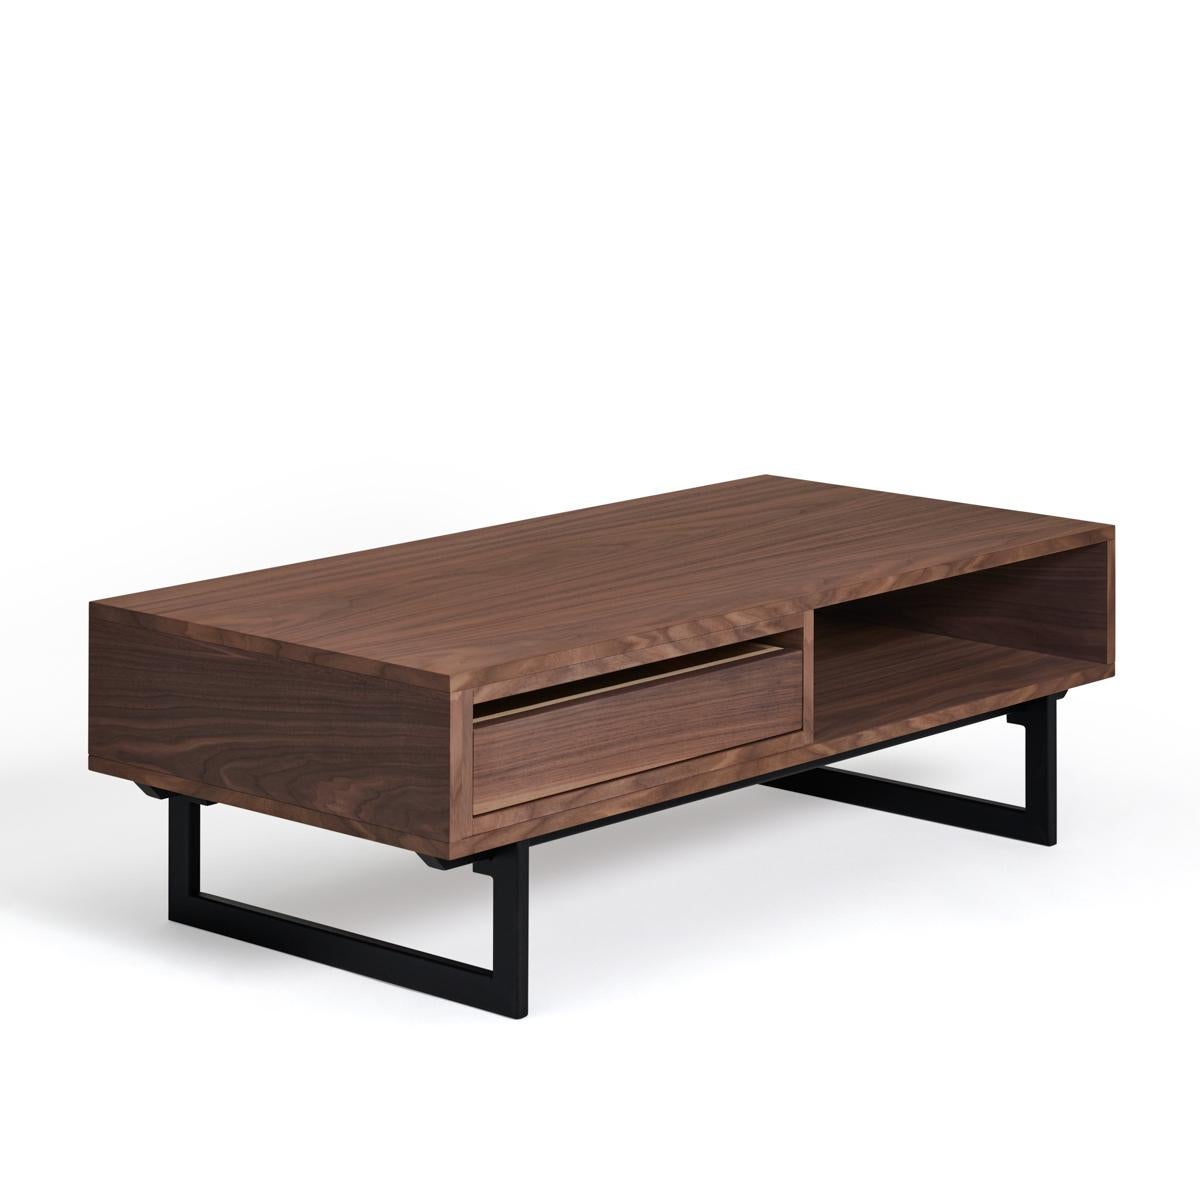 Hand-Crafted 1-drawer coffee table in walnut & black iron feet, design by Christophe Lecomte For Sale